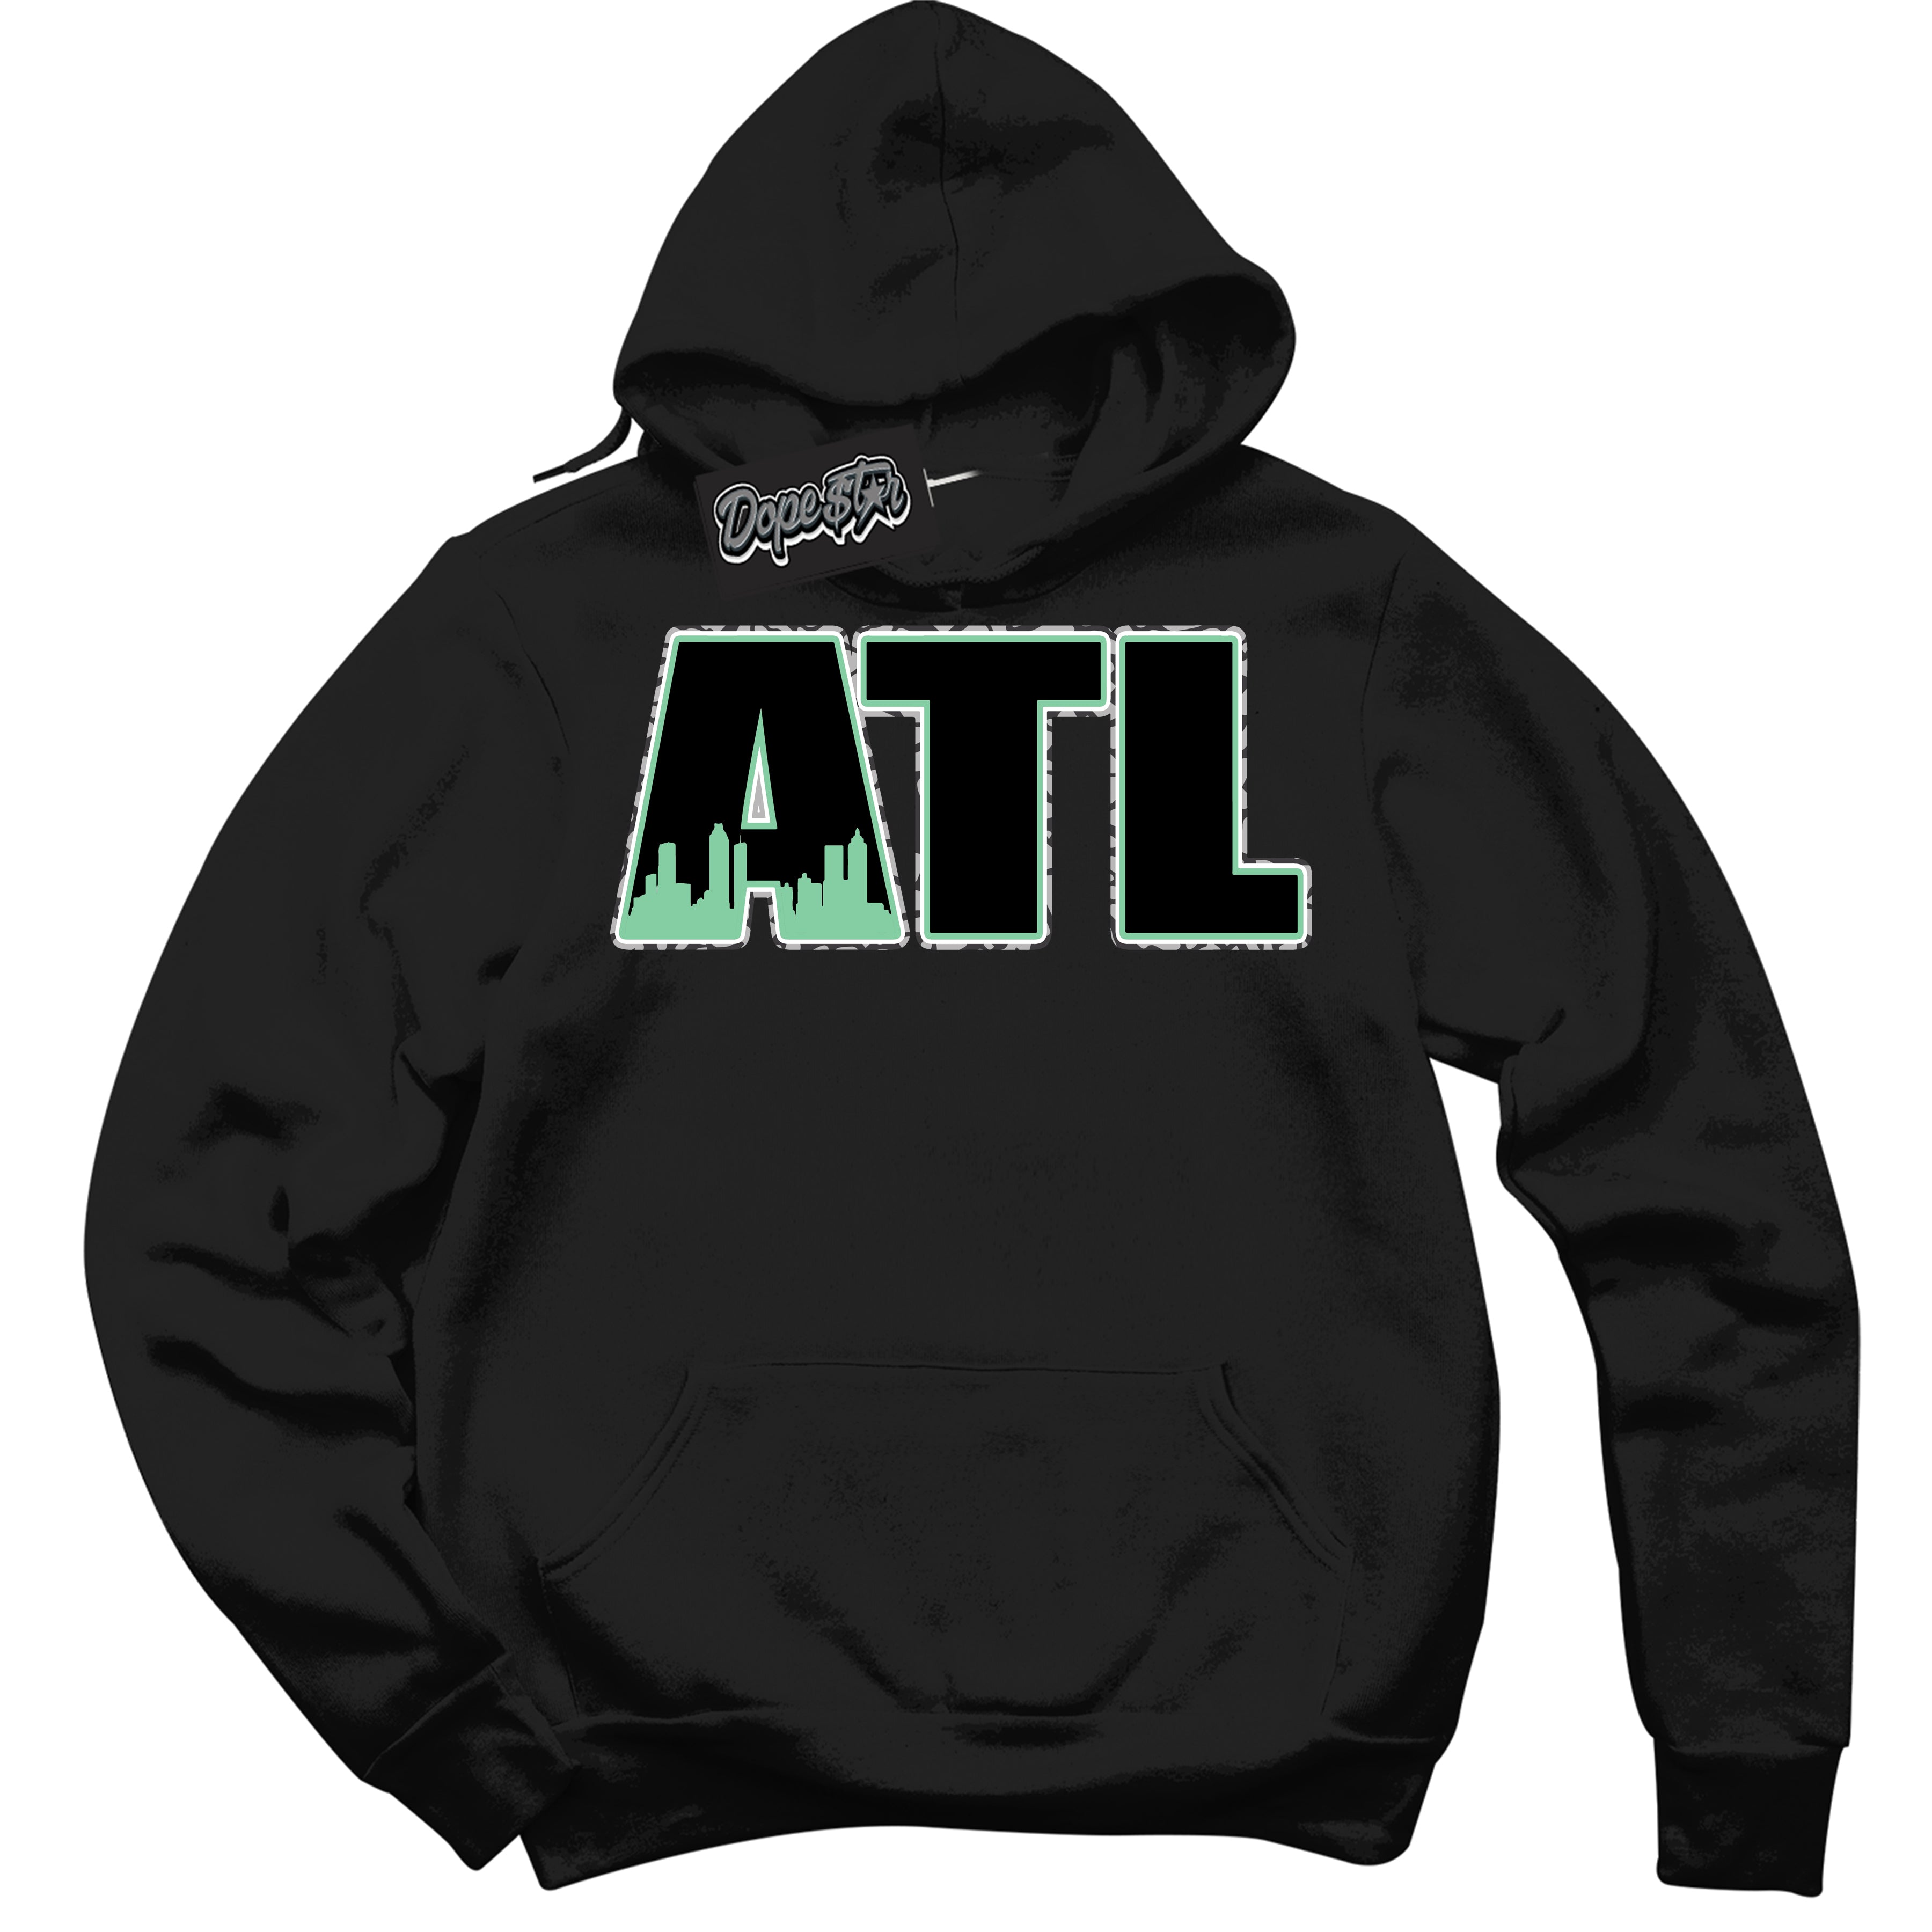 Cool Black Graphic DopeStar Hoodie with “ Atlanta “ print, that perfectly matches Green Glow 3S sneakers